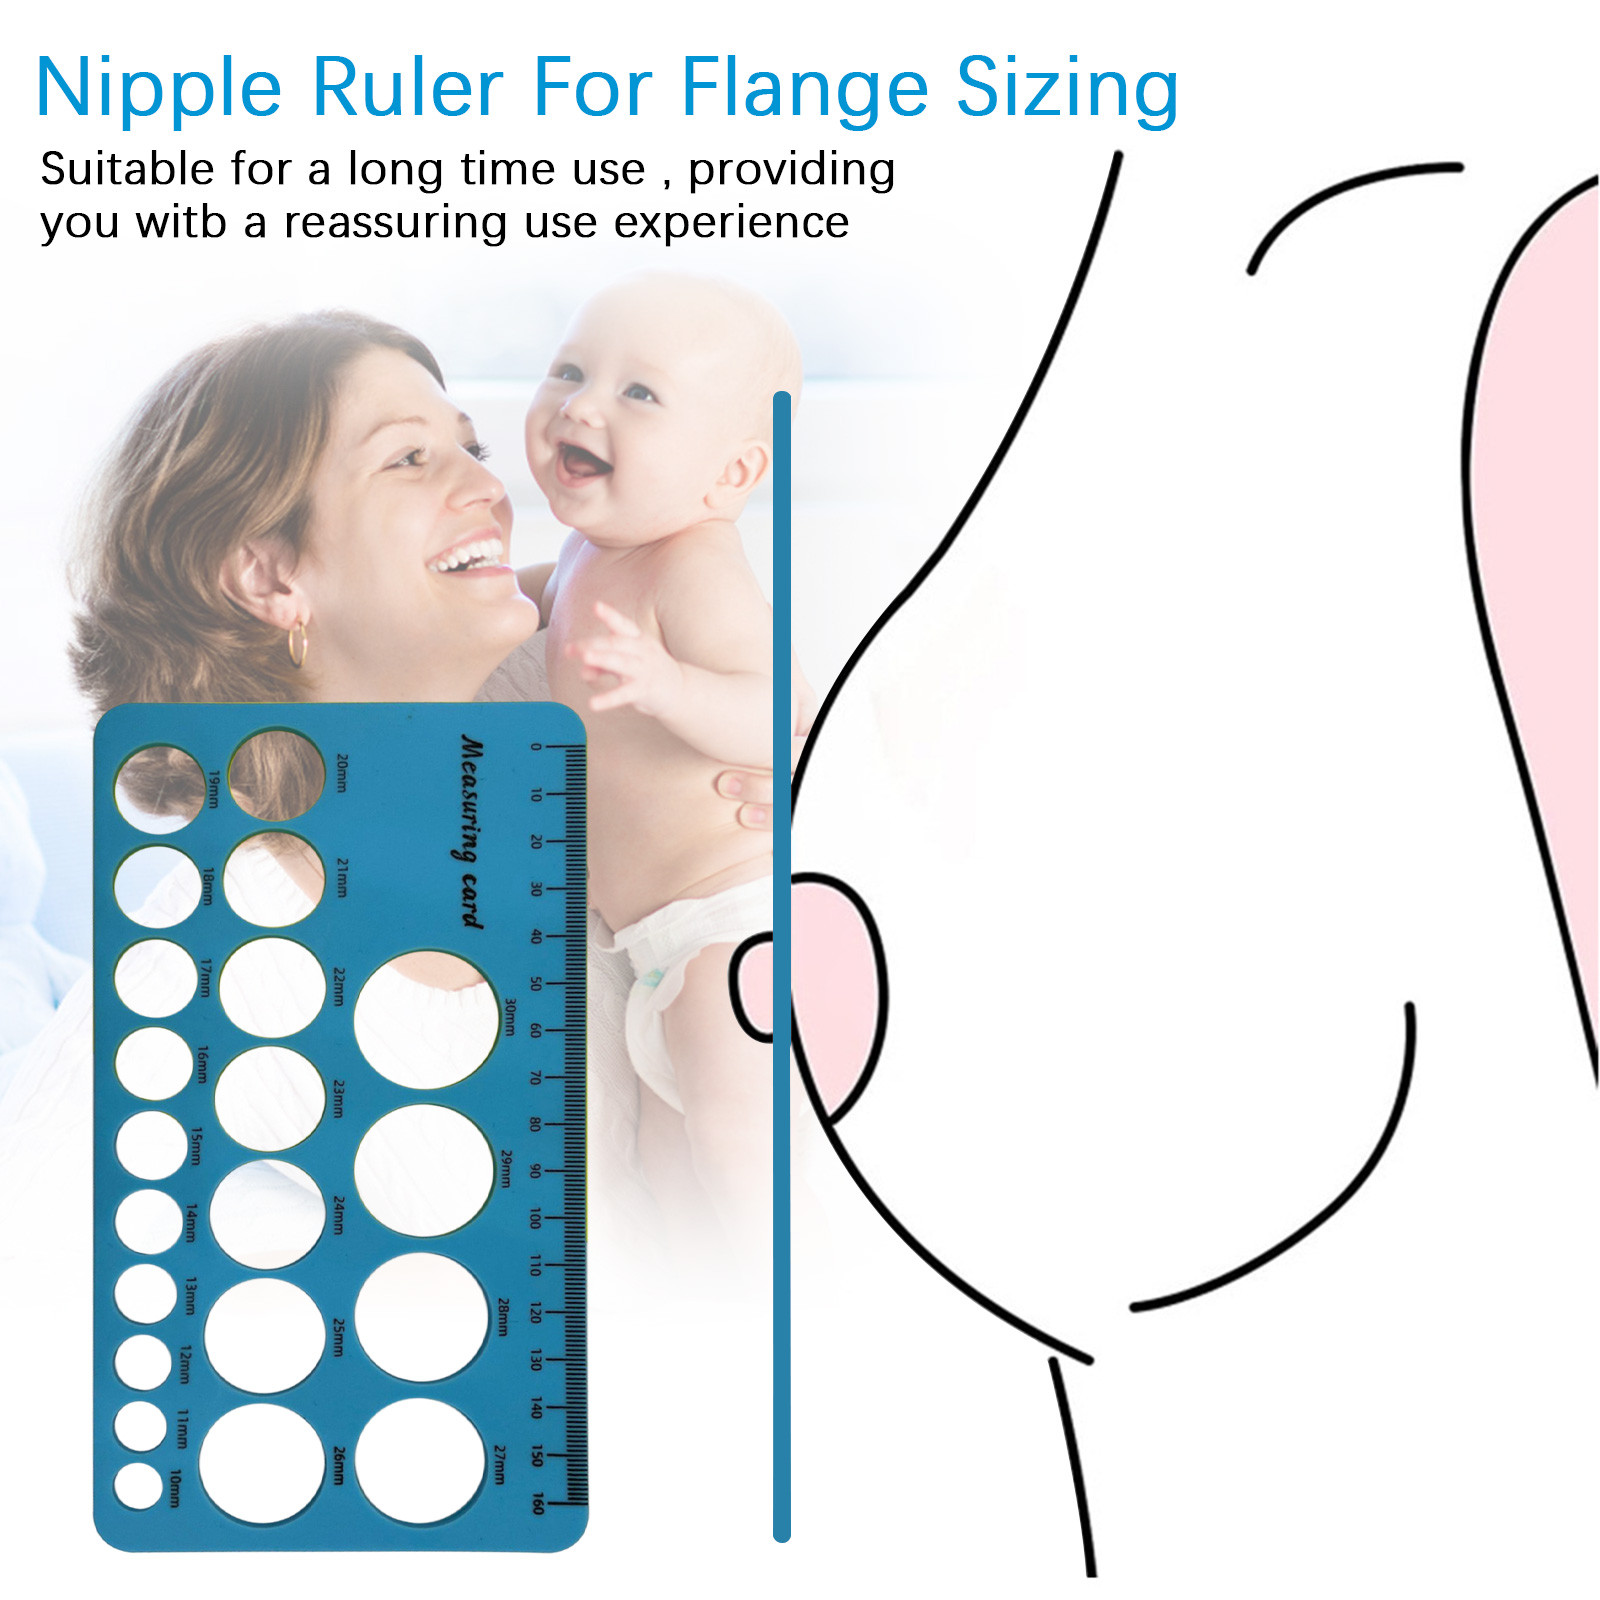 PRINxy Nipple Ruler For Flange Sizing Measurement Tool Silicone & Soft  Flange Size Measure For Nipples Breast Flange Measuring Tool Breast Pump  Sizing